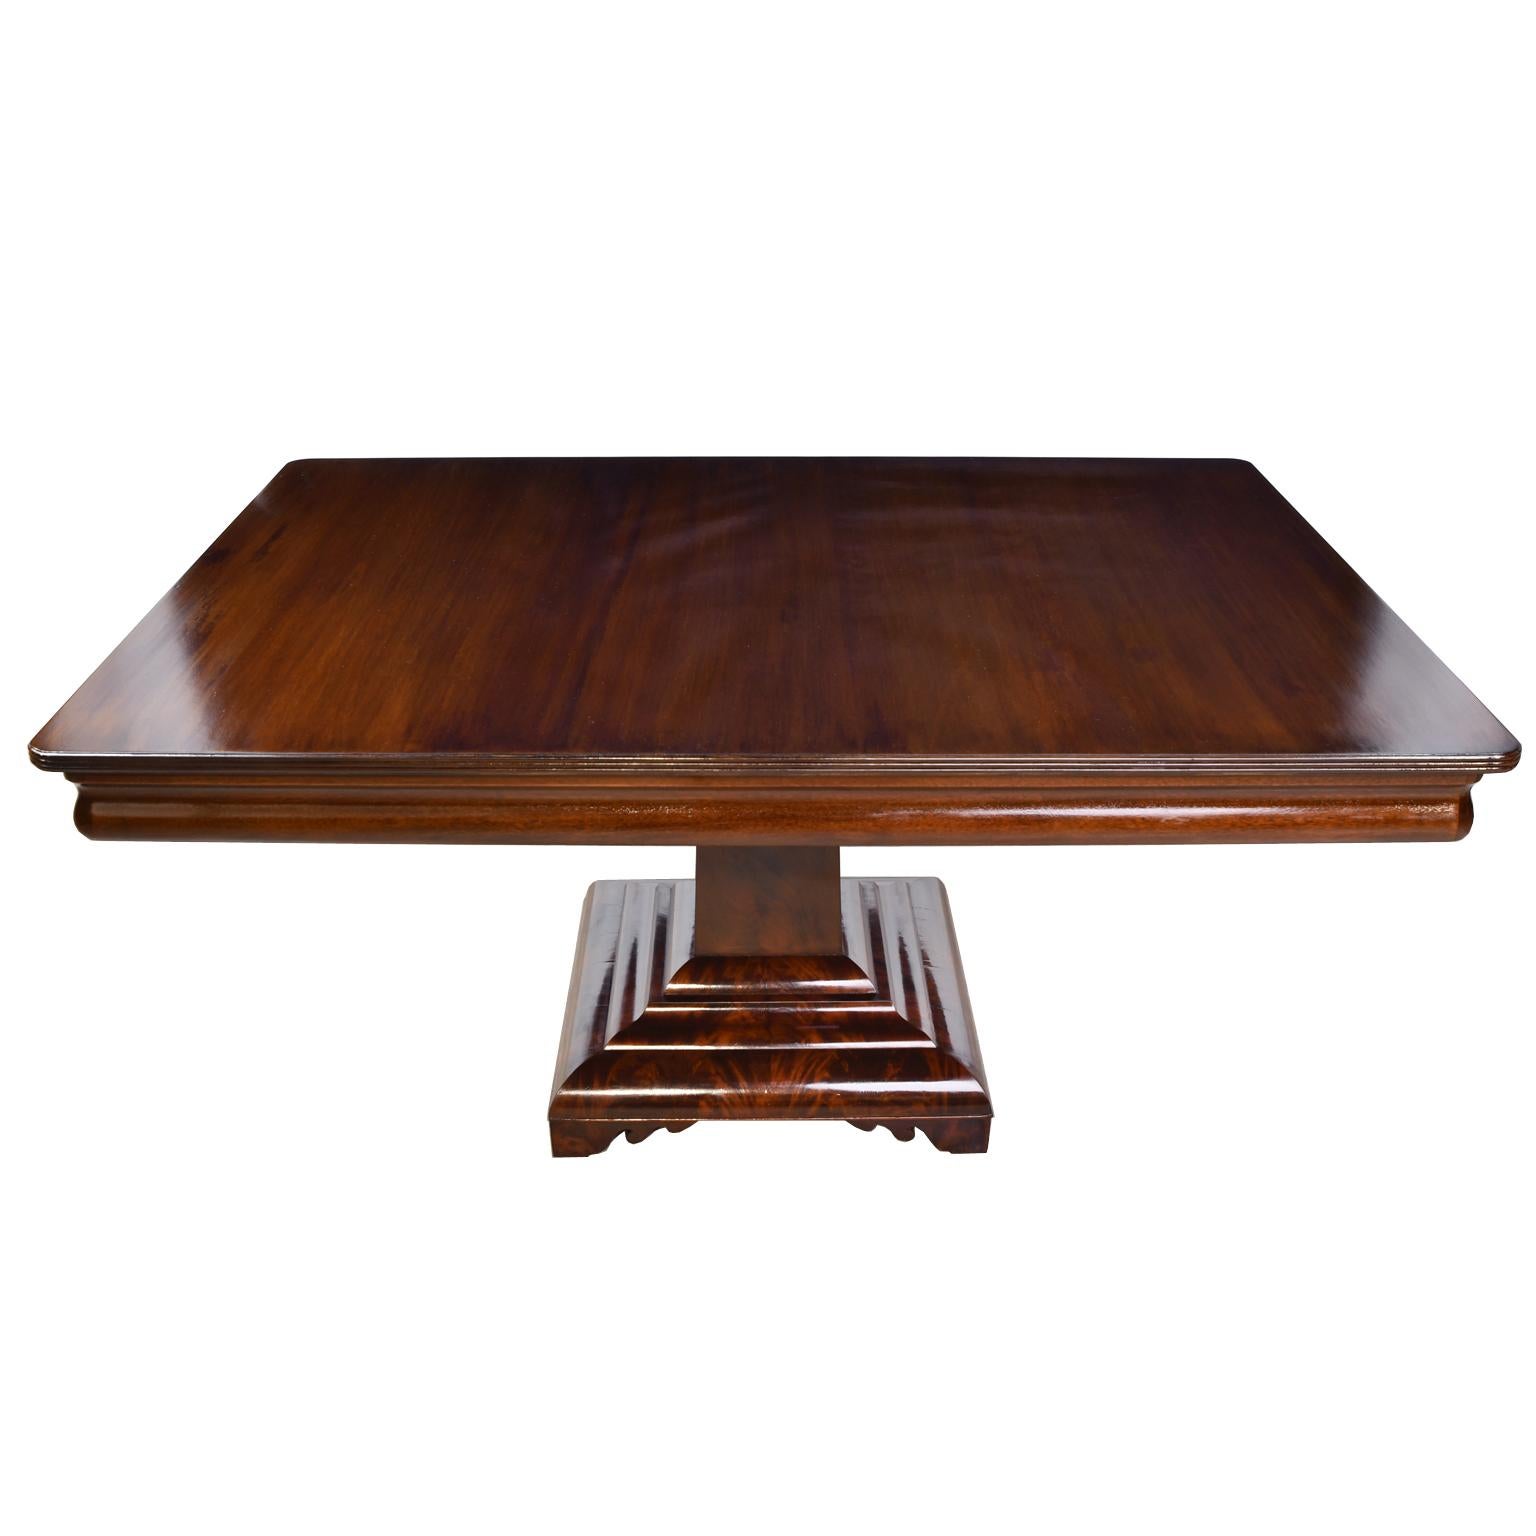 American Classical American Empire/Classical Dining Table in Mahogany w/ Grecian-Form Pedestal Base For Sale